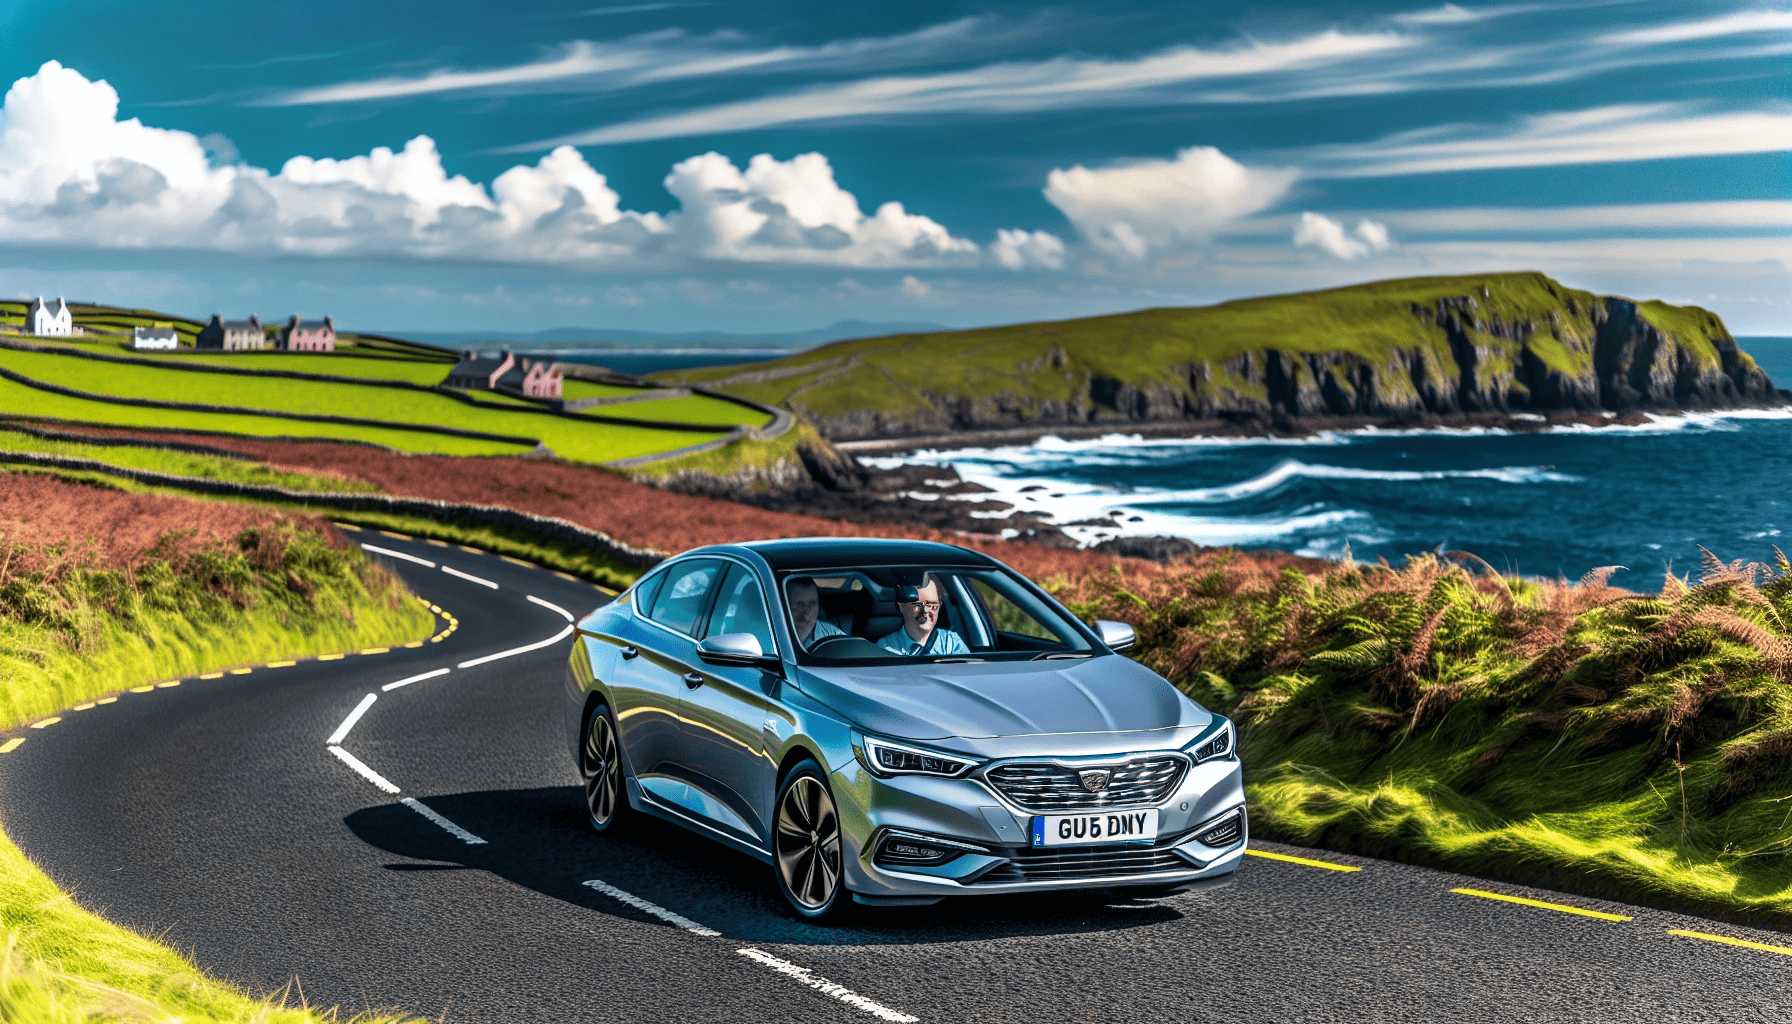 Car driving on a scenic coastal road in Northern Ireland